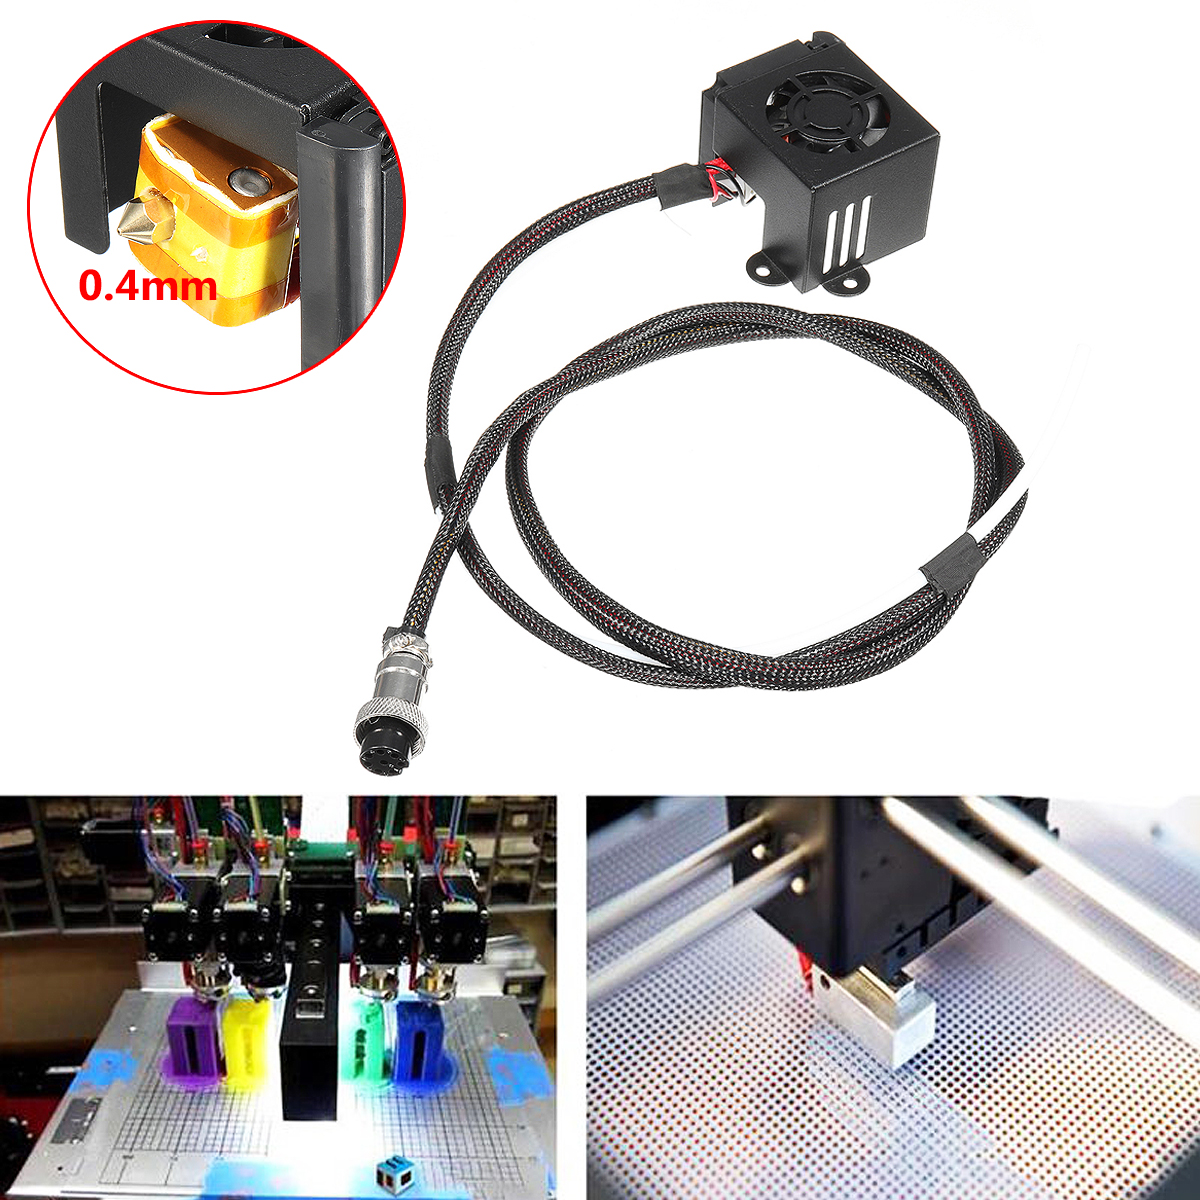 3D Printer Parts 0.4mm Nozzle Hot End Extruder Kits With Cooling Fan For Creality CR-10 13